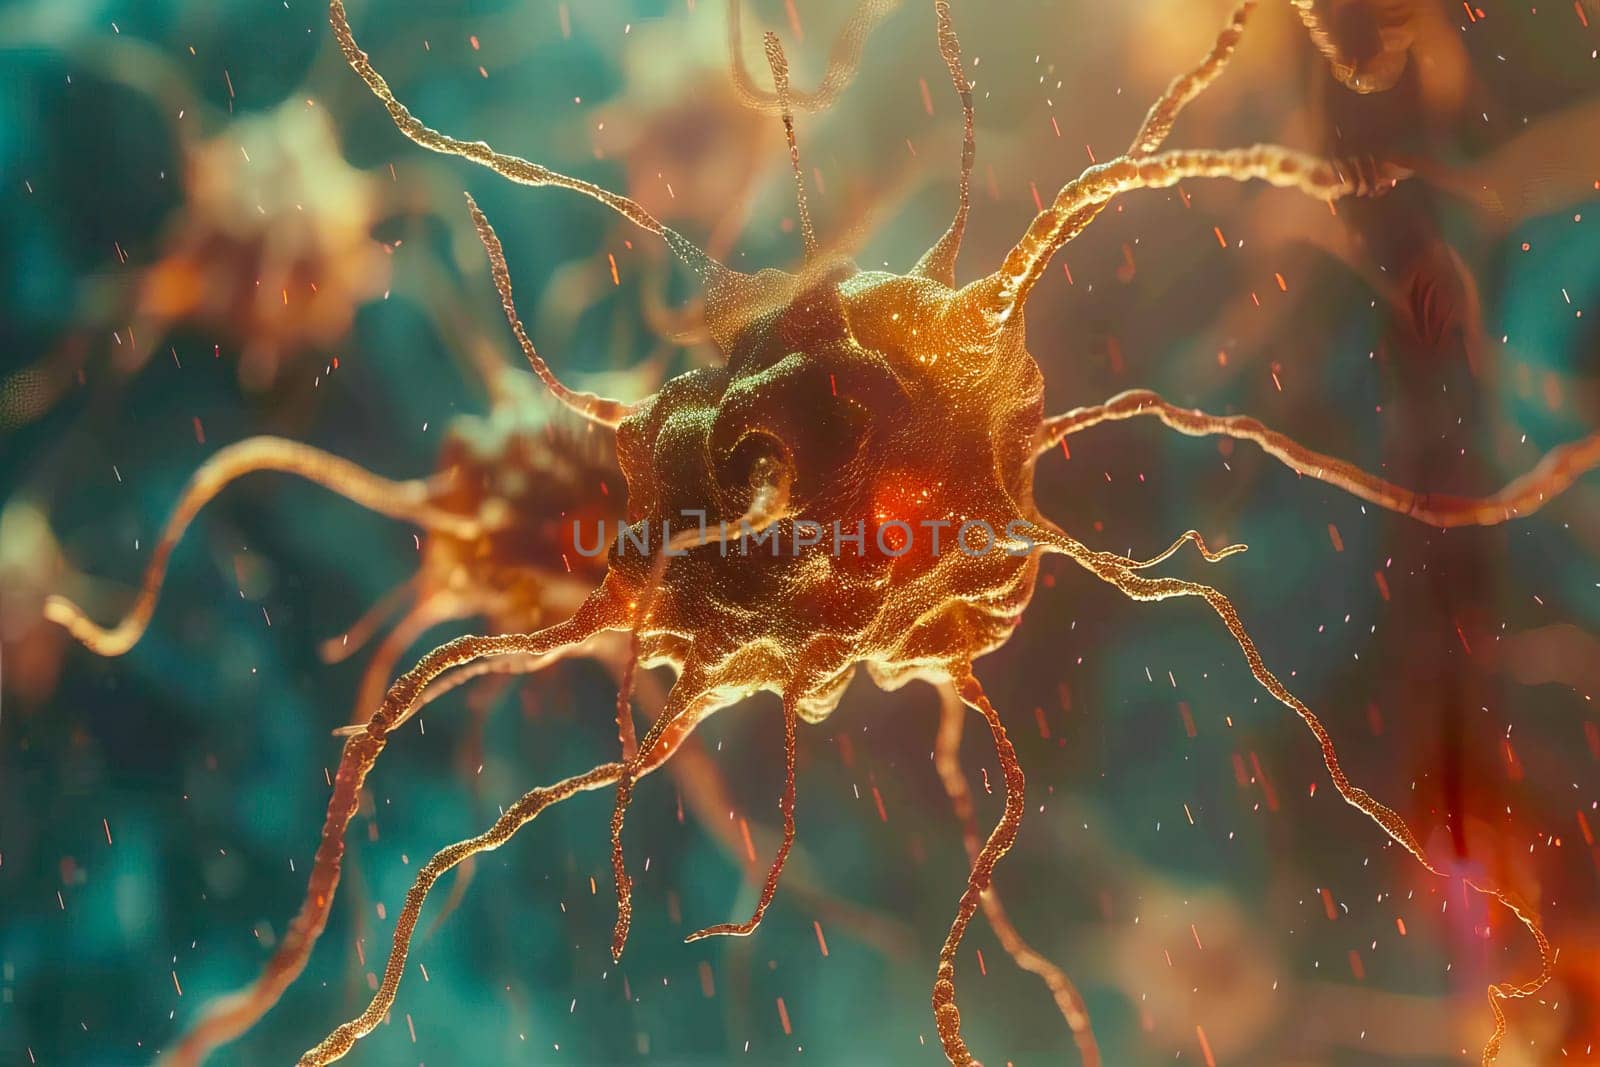 A close-up displaying the complexity of interconnected neurons firing in a brain by vladimka